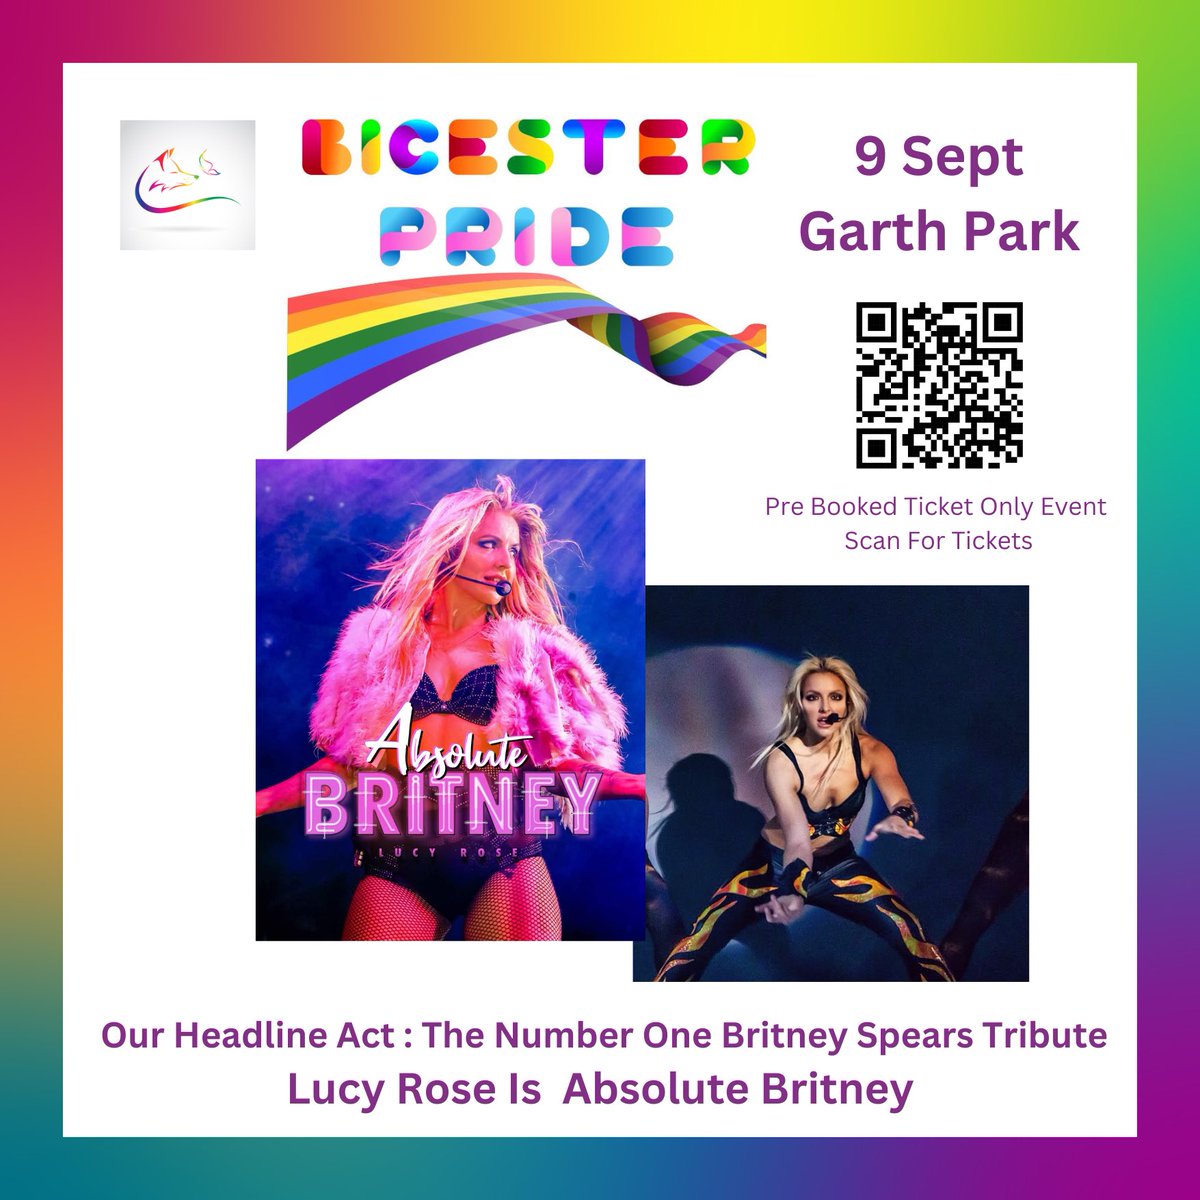 Announcing our headline act for BICESTER PRIDE in GARTH PARK on 9 SEPTEMBER The Number 1 Global BRITNEY SPEARS TRIBUTE 💋👇🏾👇🏽👇🏿💋 Lucy Rose Smith is ABSOLUTE BRITNEY This is a pre-booked only ticketed event EARLY BIRD TICKETS ON SALE NOW!!!